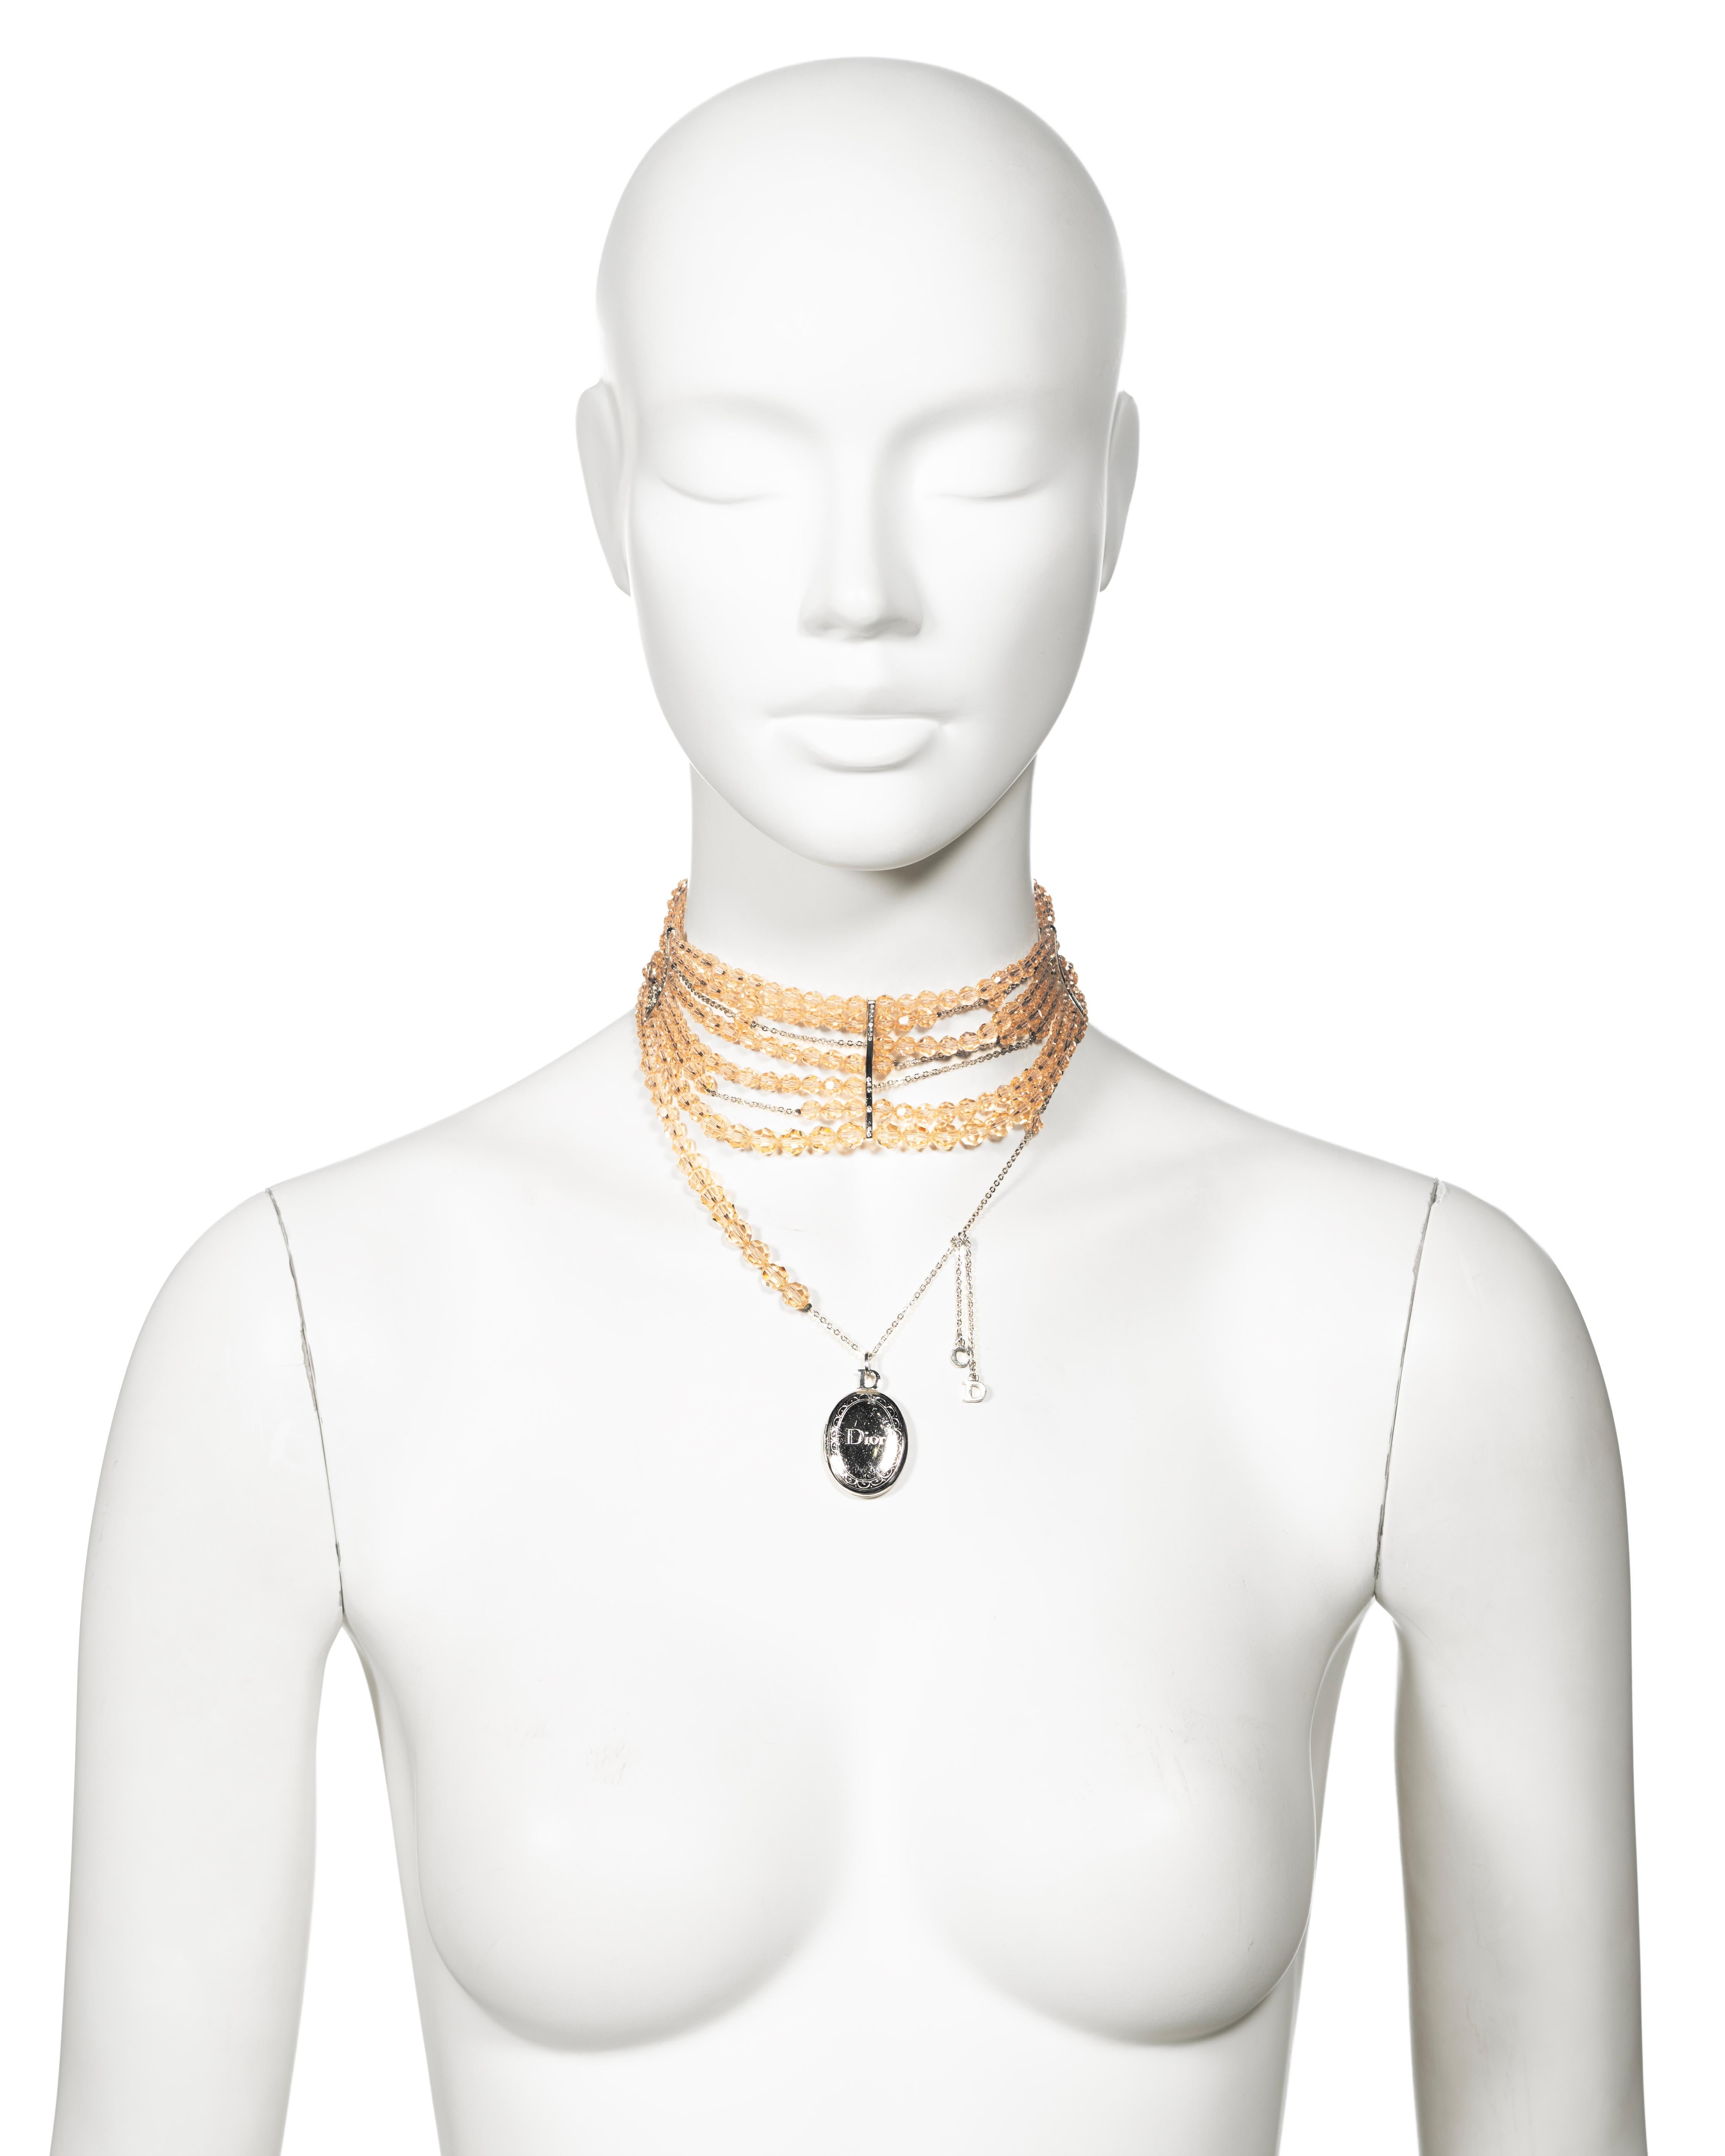 Christian Dior by John Galliano Distressed Peach Bead Choker Necklace, c. 2004 In Good Condition For Sale In London, GB